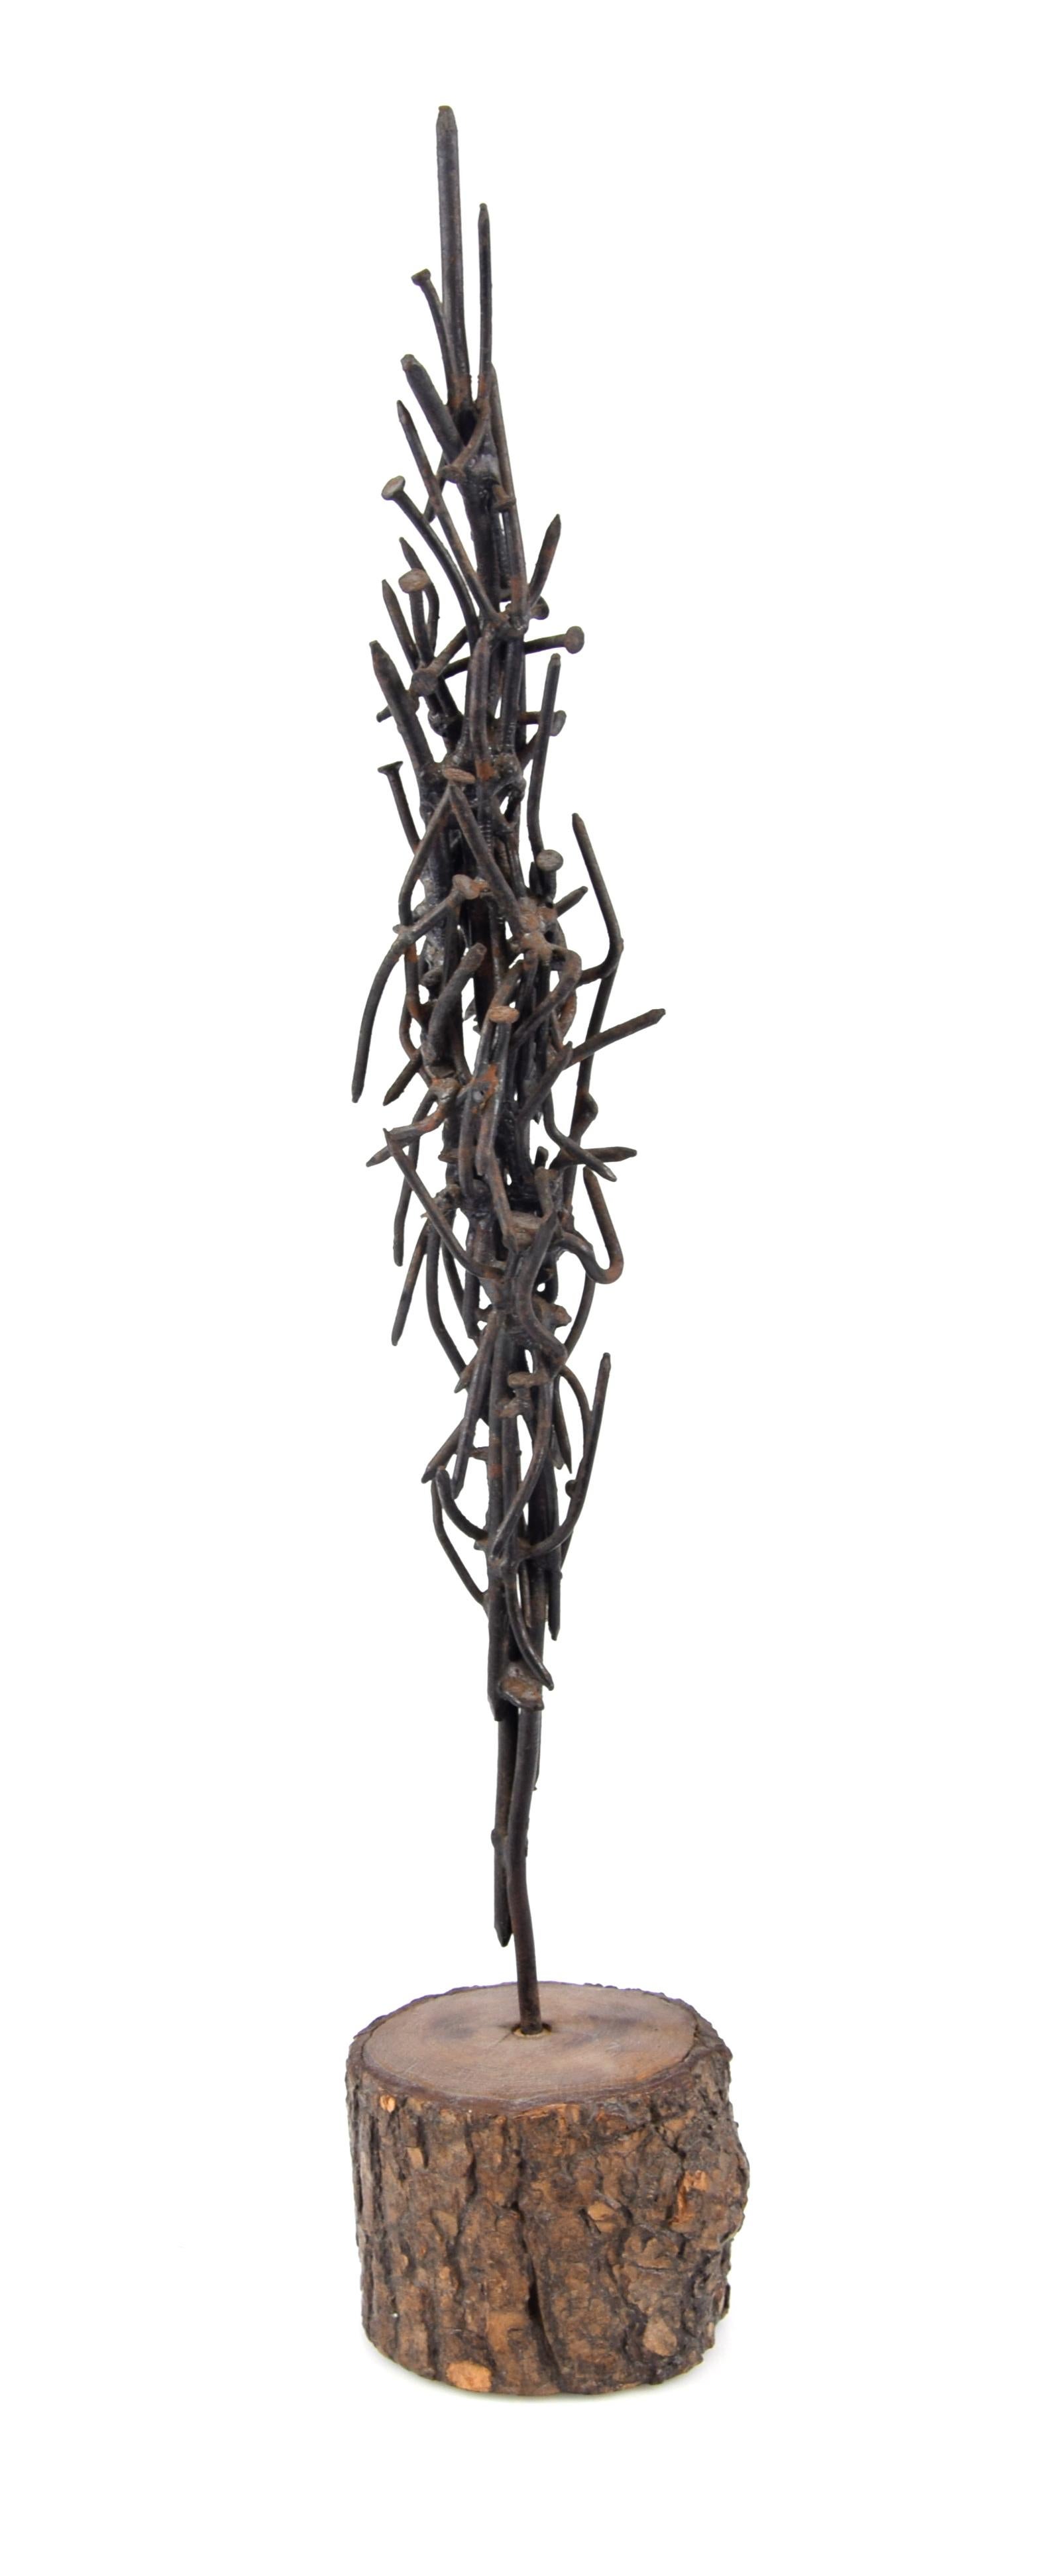 Composition with Nails - Iron Sculpture by Nino Franchina - Late 1900